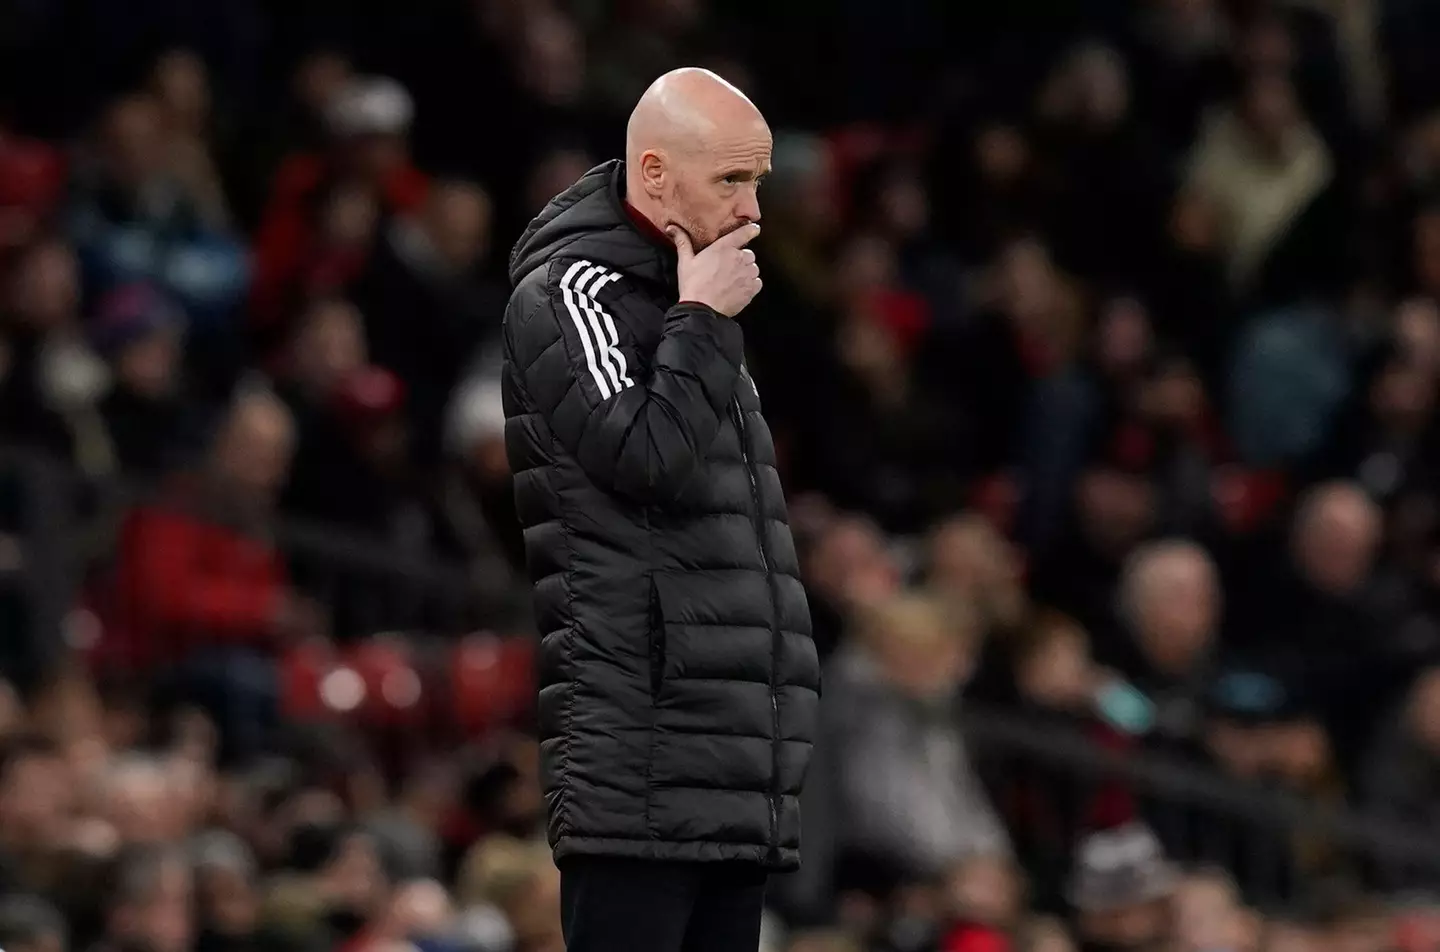 Manchester United manager Erik ten Hag has been hailed for his work at Old Trafford this season.